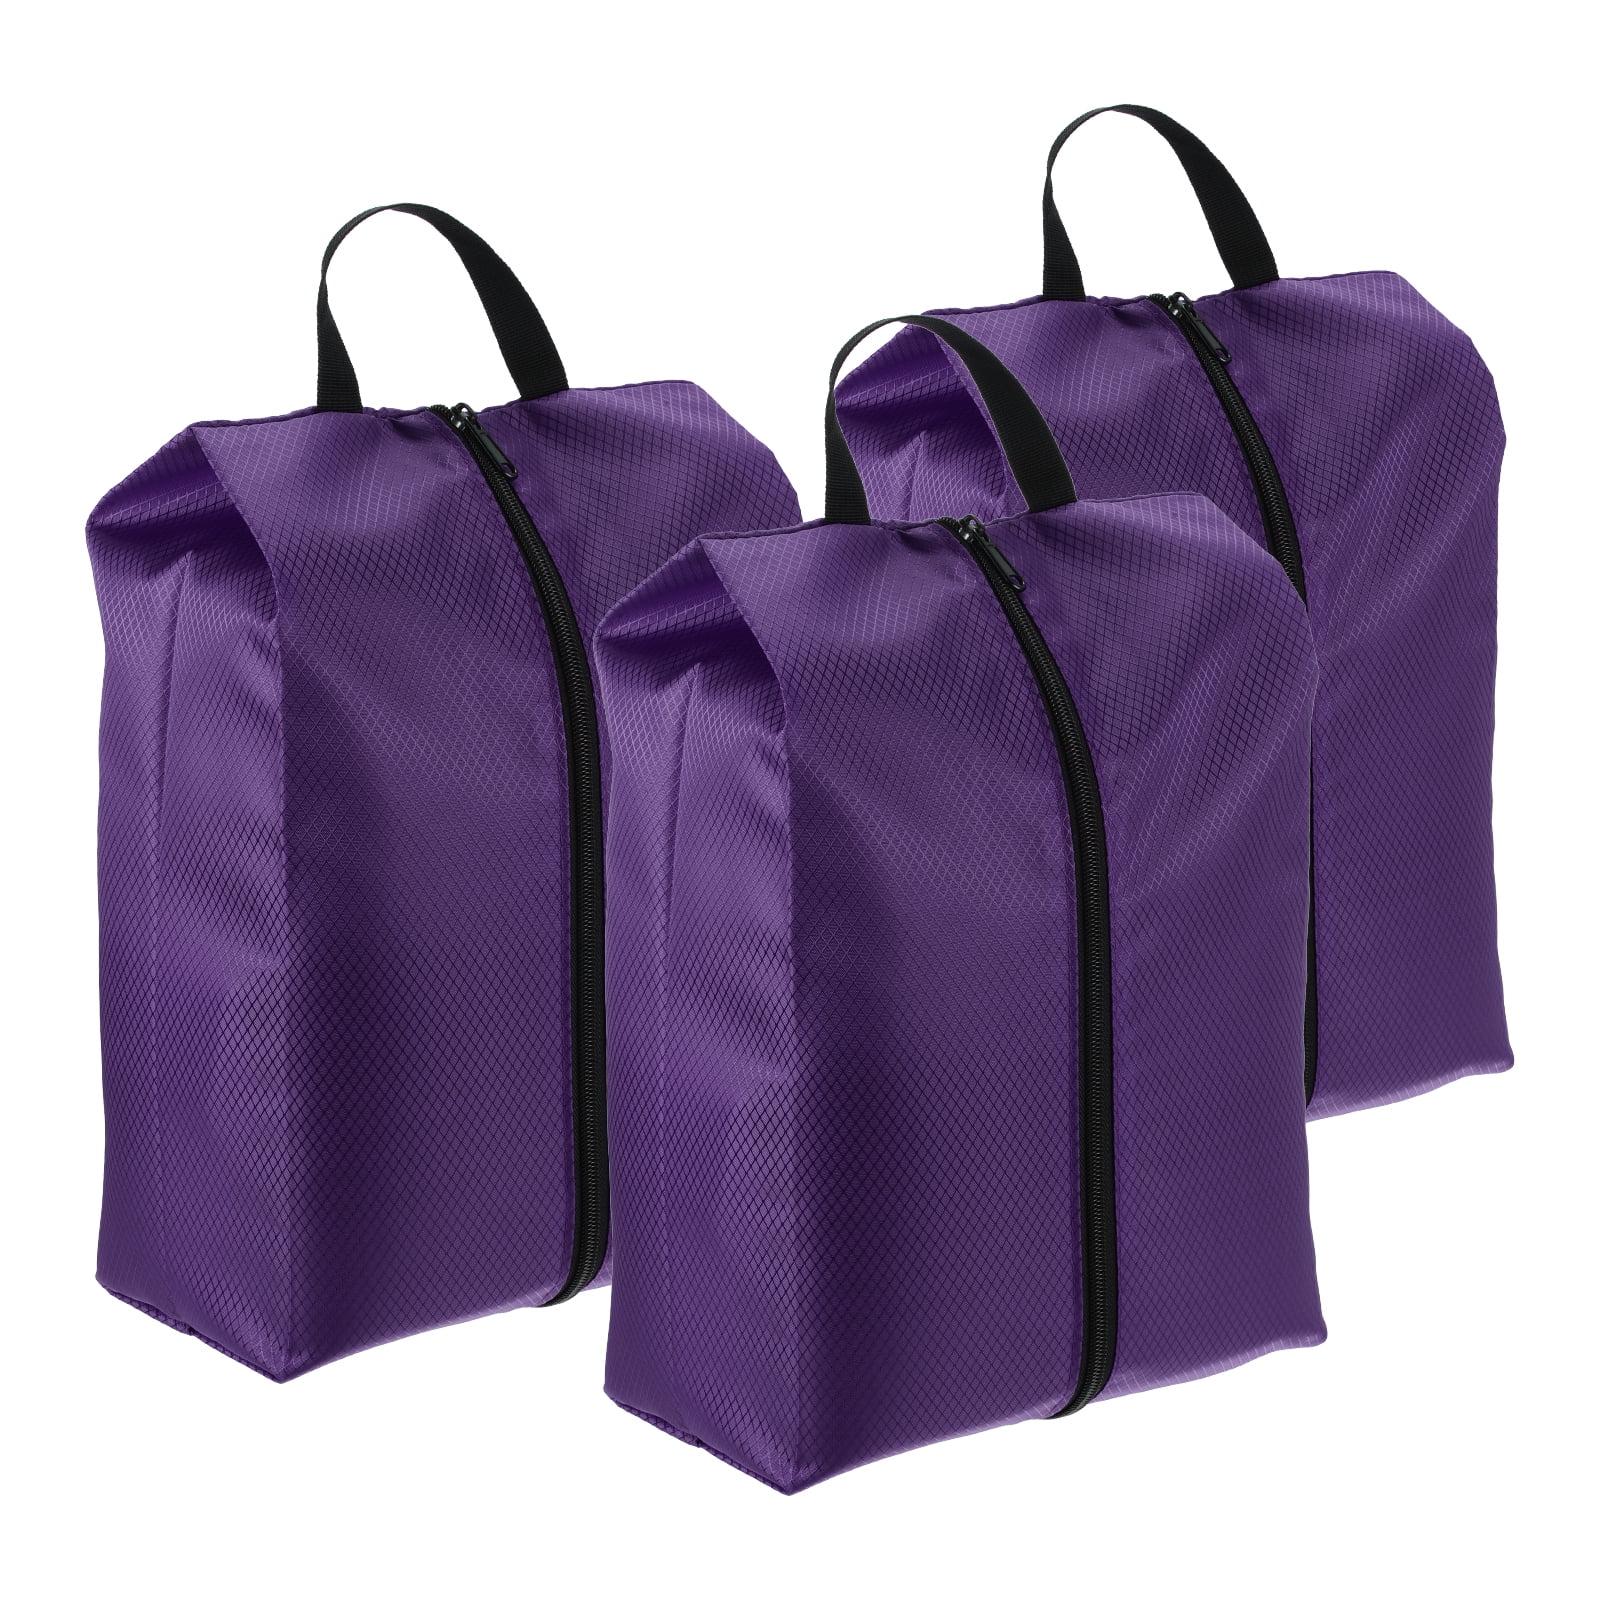 Uxcell Shoe Bags for Travel, Portable Shoe Bag with Zipper for Travel,  Purple 3 Pack